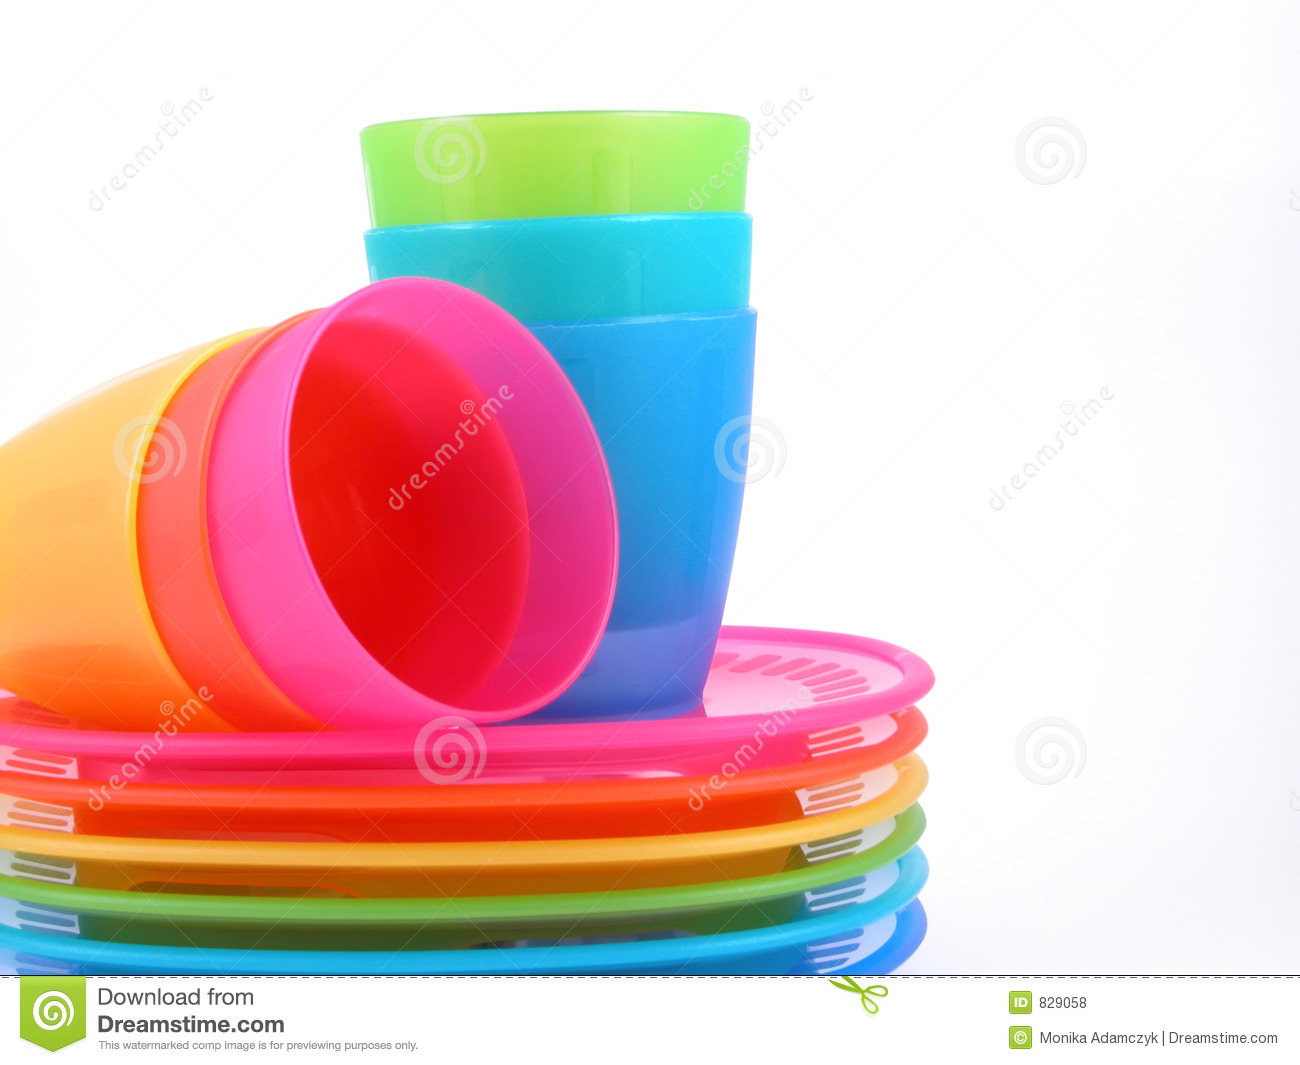 Plastic Cups And Plates Royalty Free Stock Photos   Image  829058